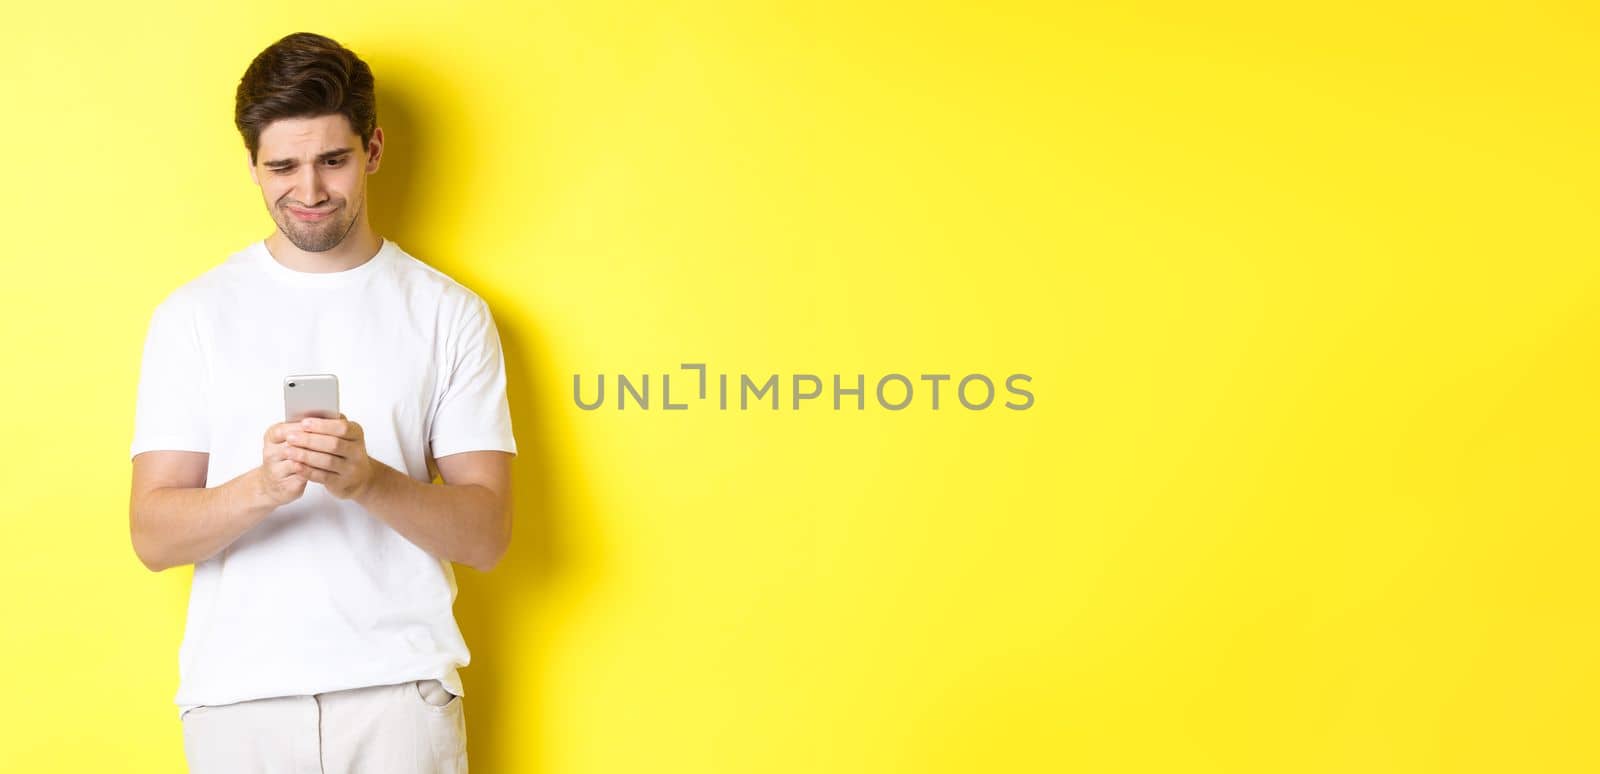 Guy looking displeased at smartphone screen, reading strange message on phone, standing in white t-shirt against yellow background.